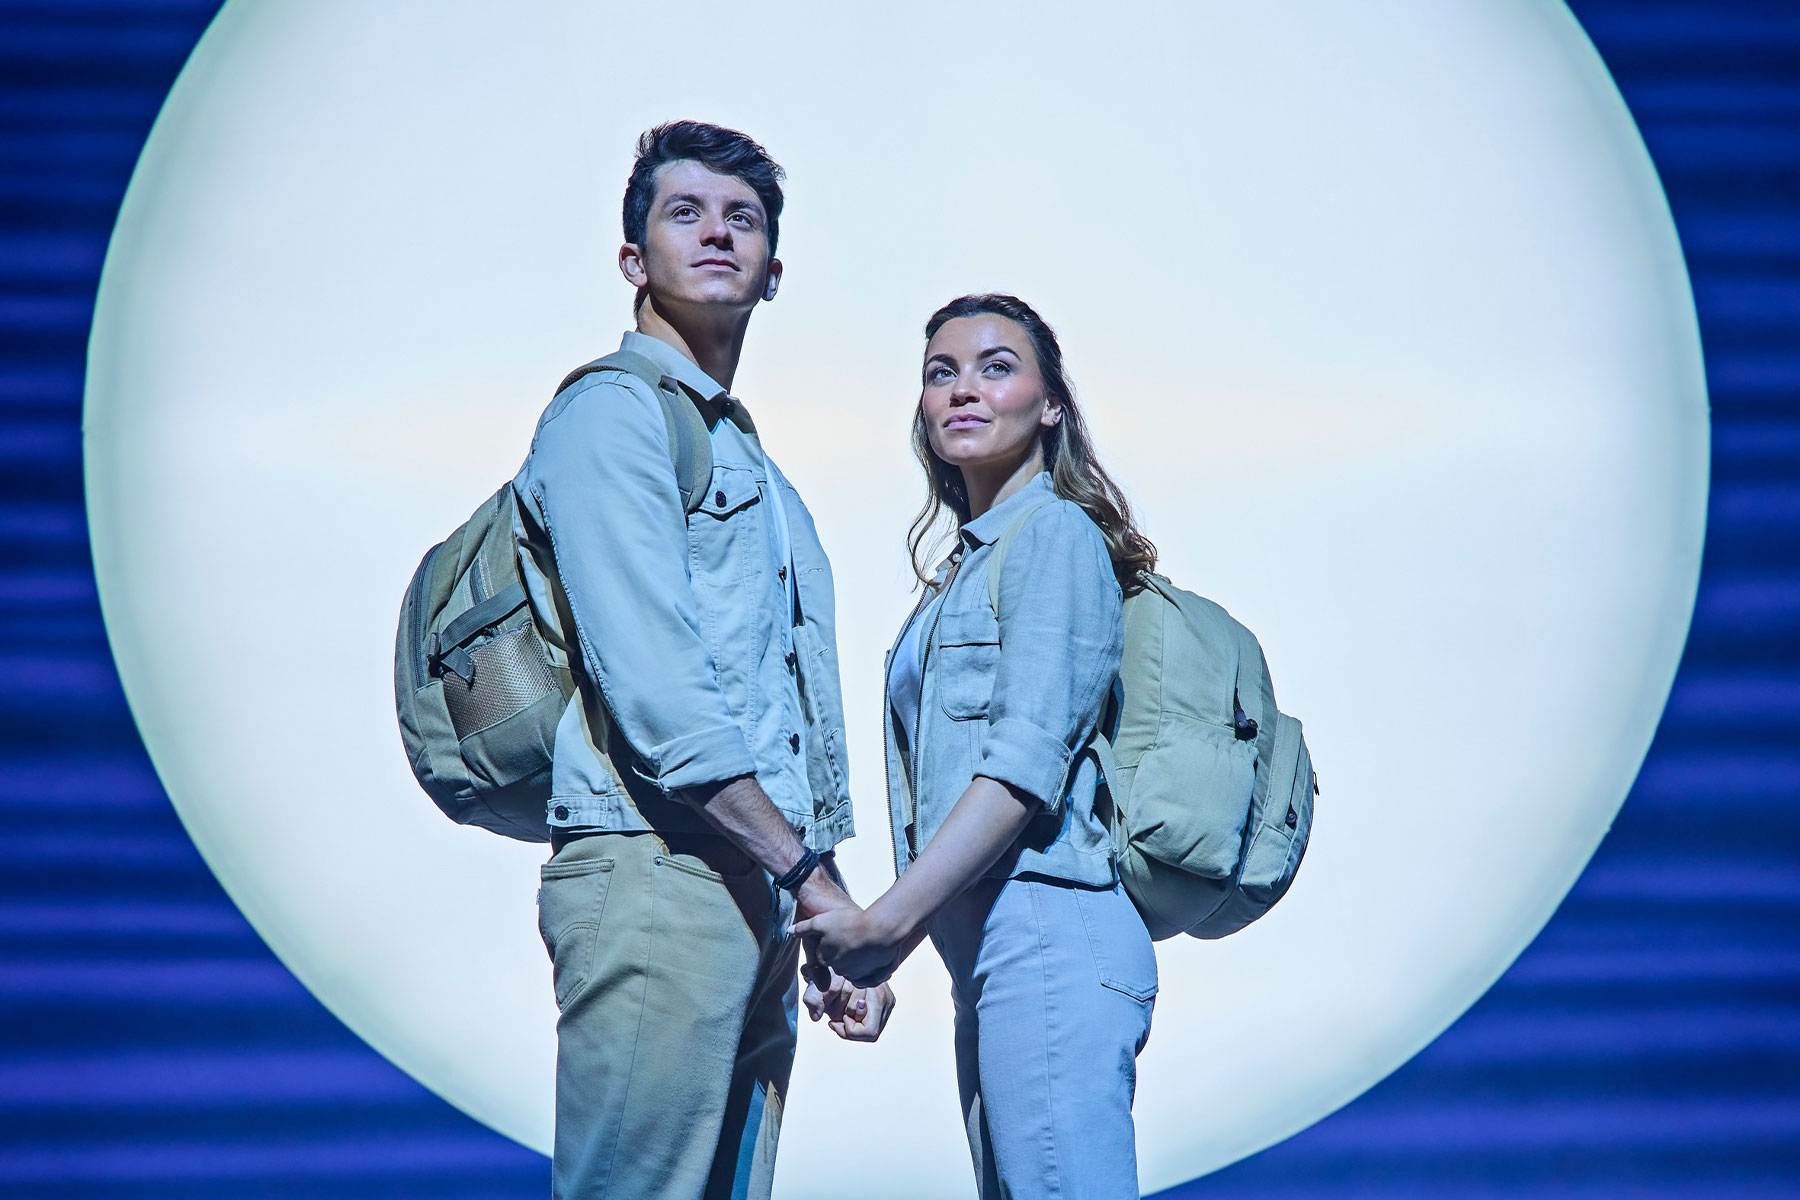 Tobias Turley as Sky and Stevie Doc as Sophie in a scene from Mamma Mia! at the Novello Theatre